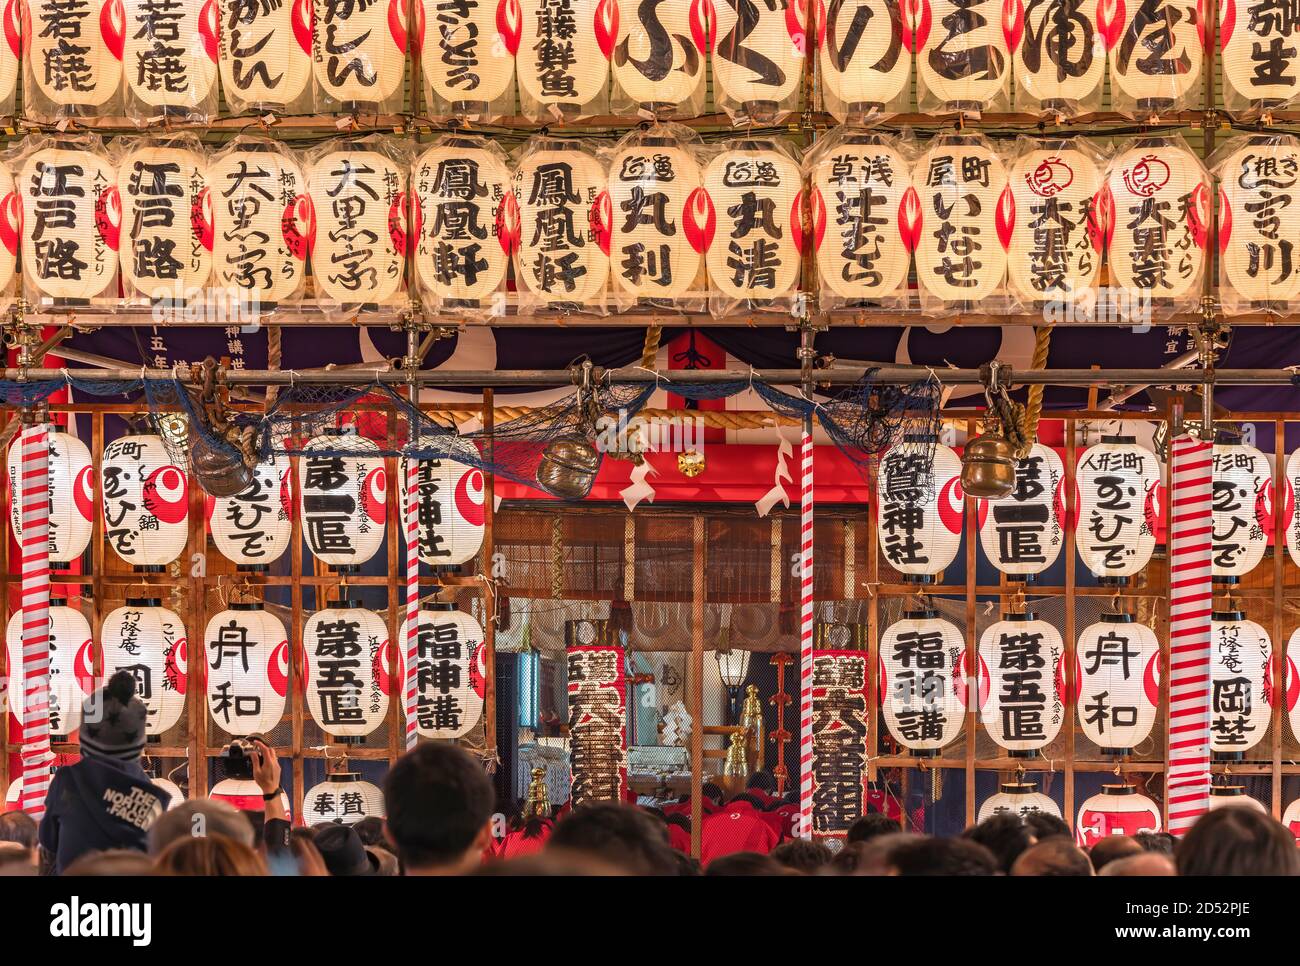 asakusa, japan - november 08 2019: Crowd of people waiting for make a wish by ringing the suzu bells of Ootori shrine decorated with luminous handwrit Stock Photo